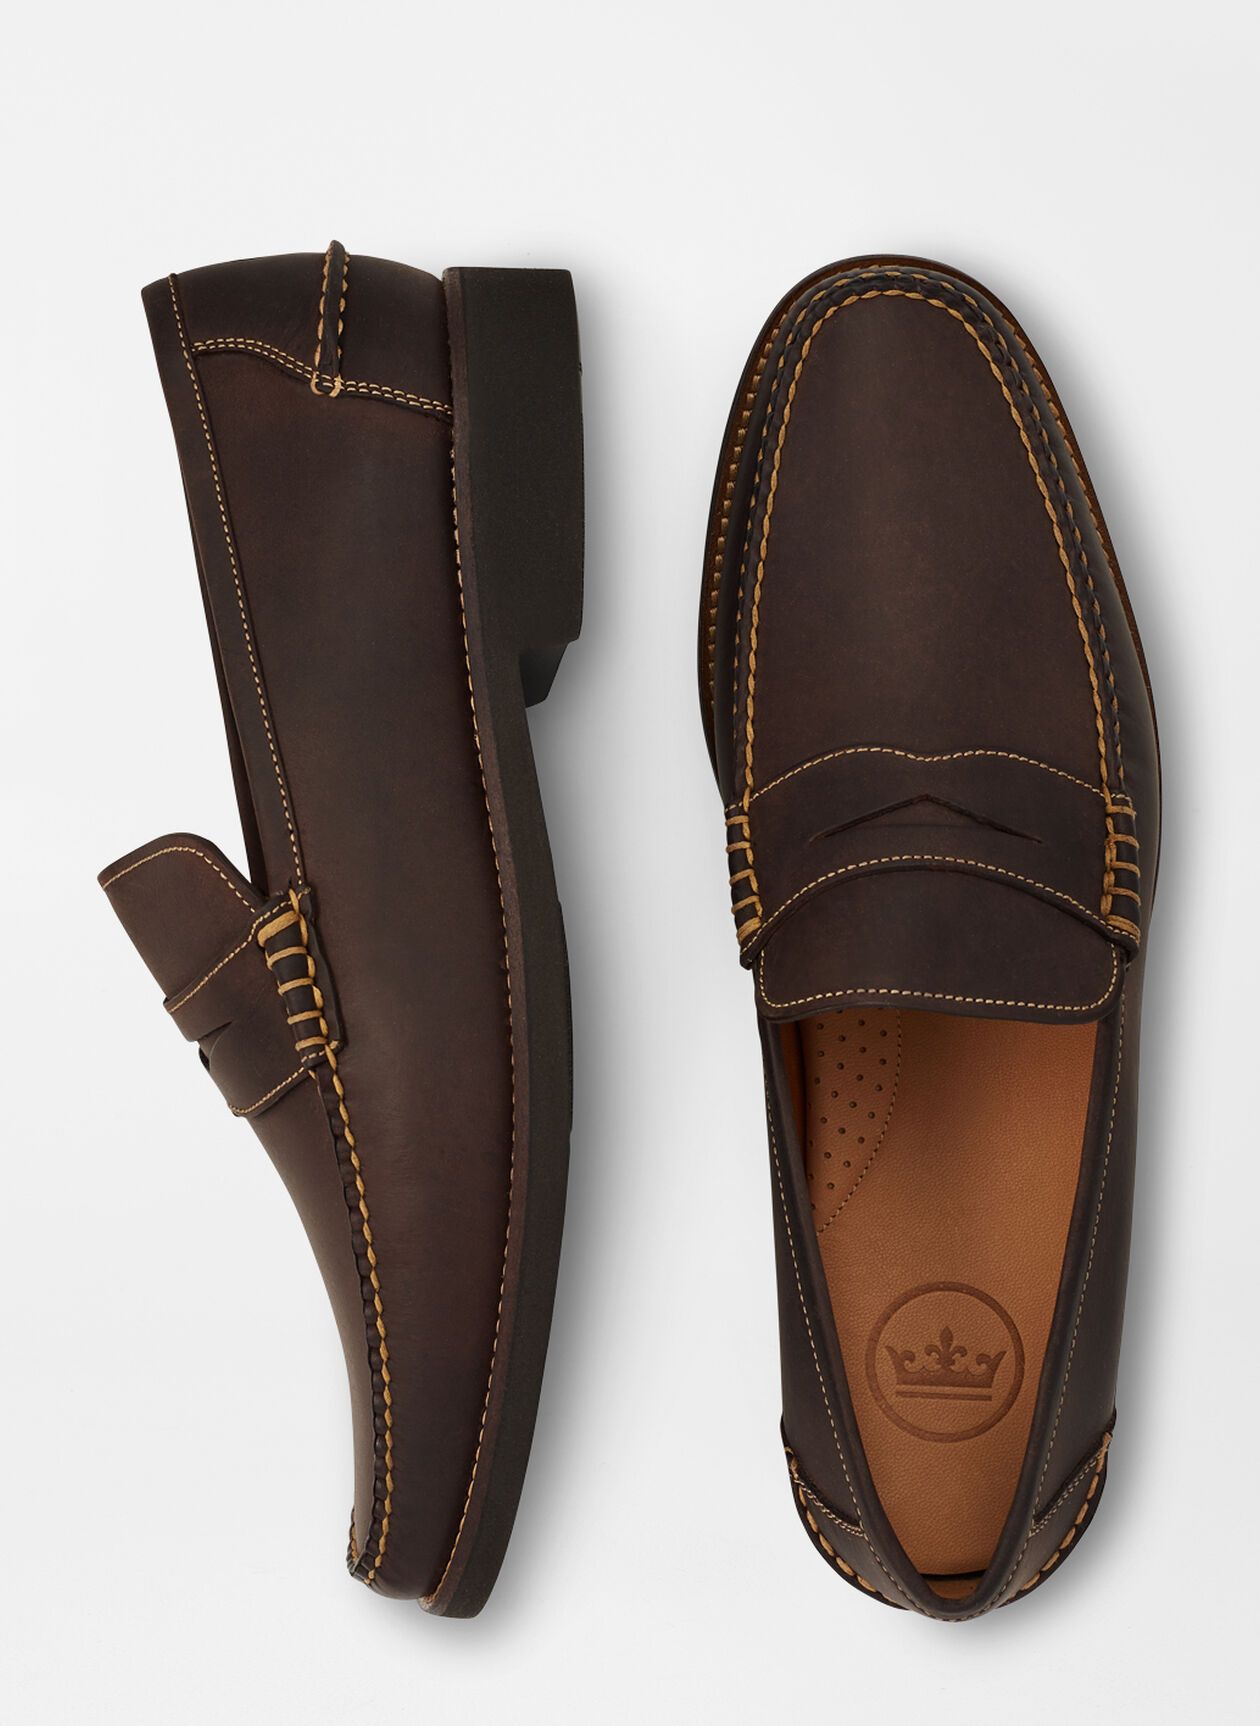 Handsewn Leather Penny Loafer | Peter Millar